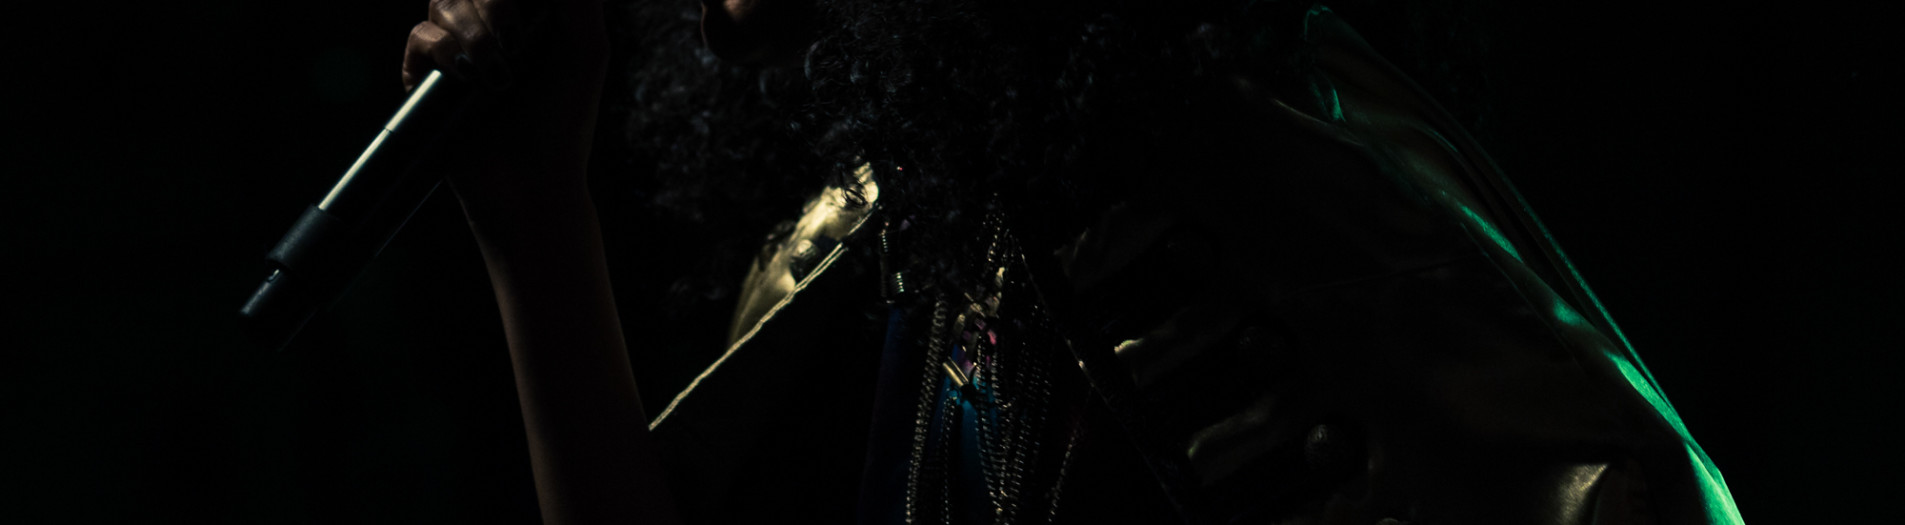 CONCERT PHOTOGRAPHY : JUDITH HILL : RISING STAR